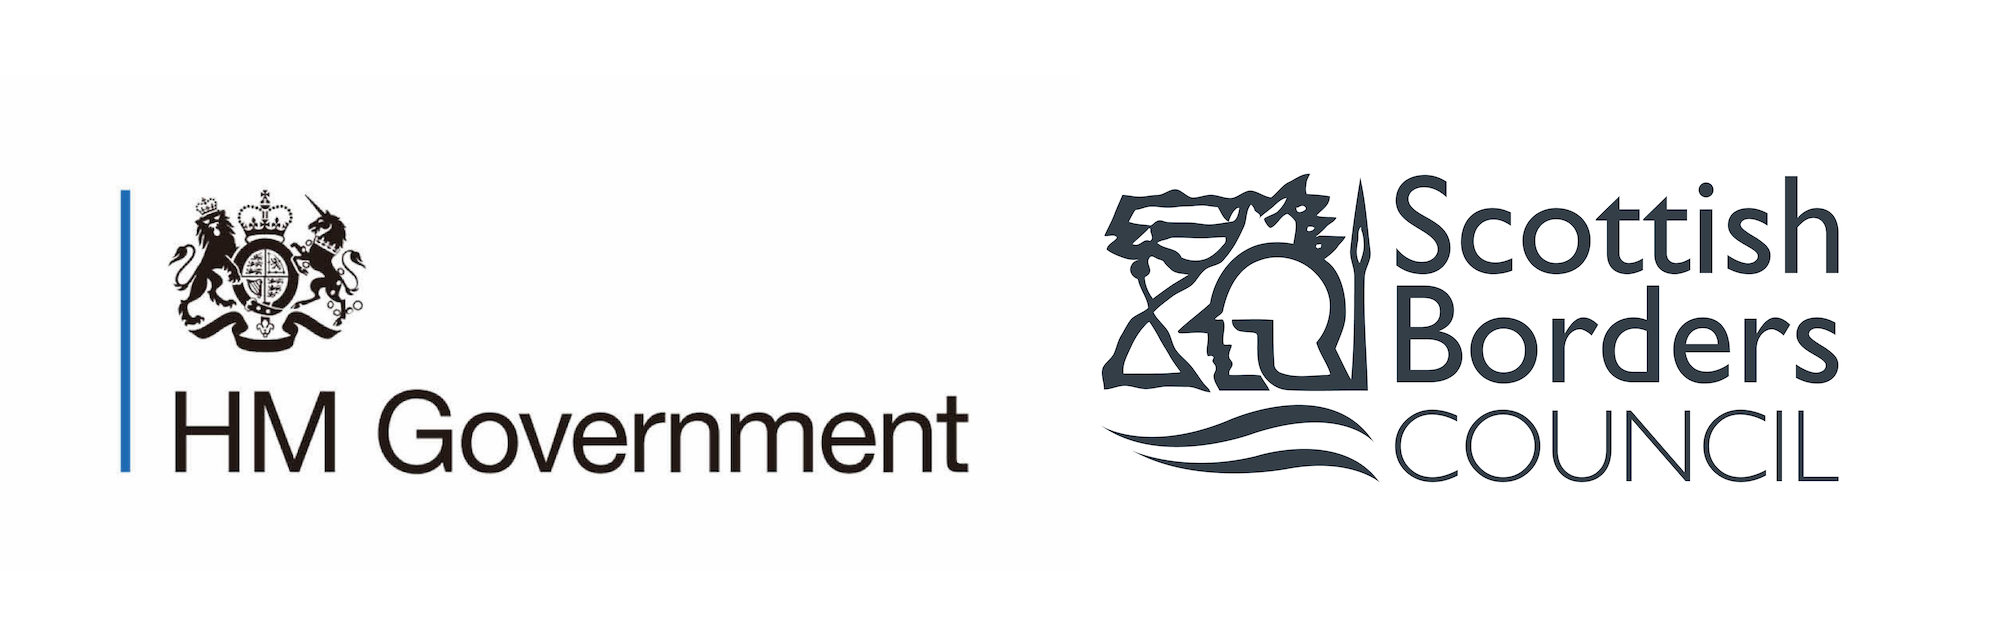 Council and Government logo